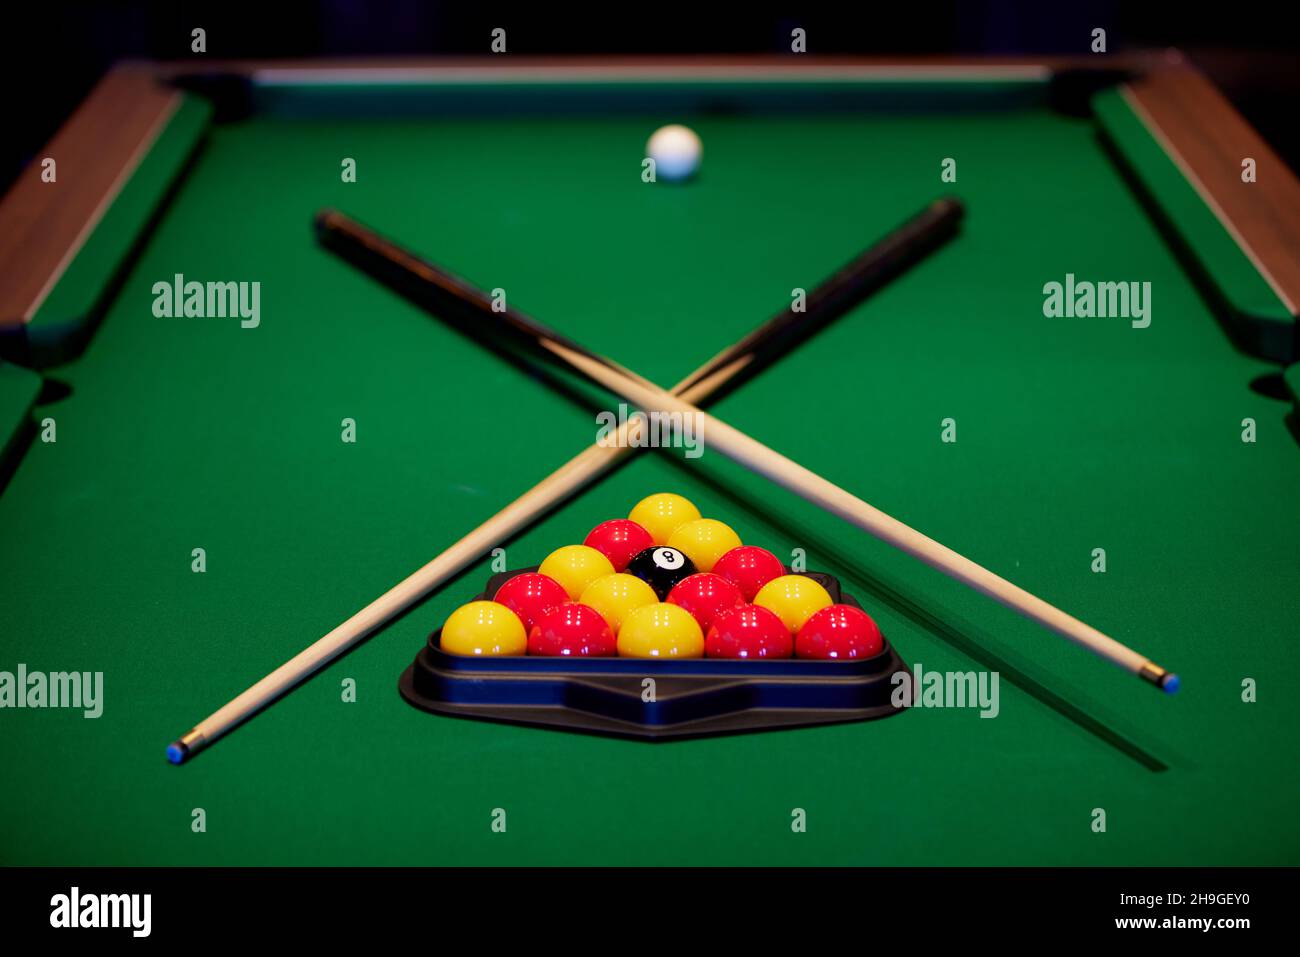 Pool table in a sports bar Stock Photo